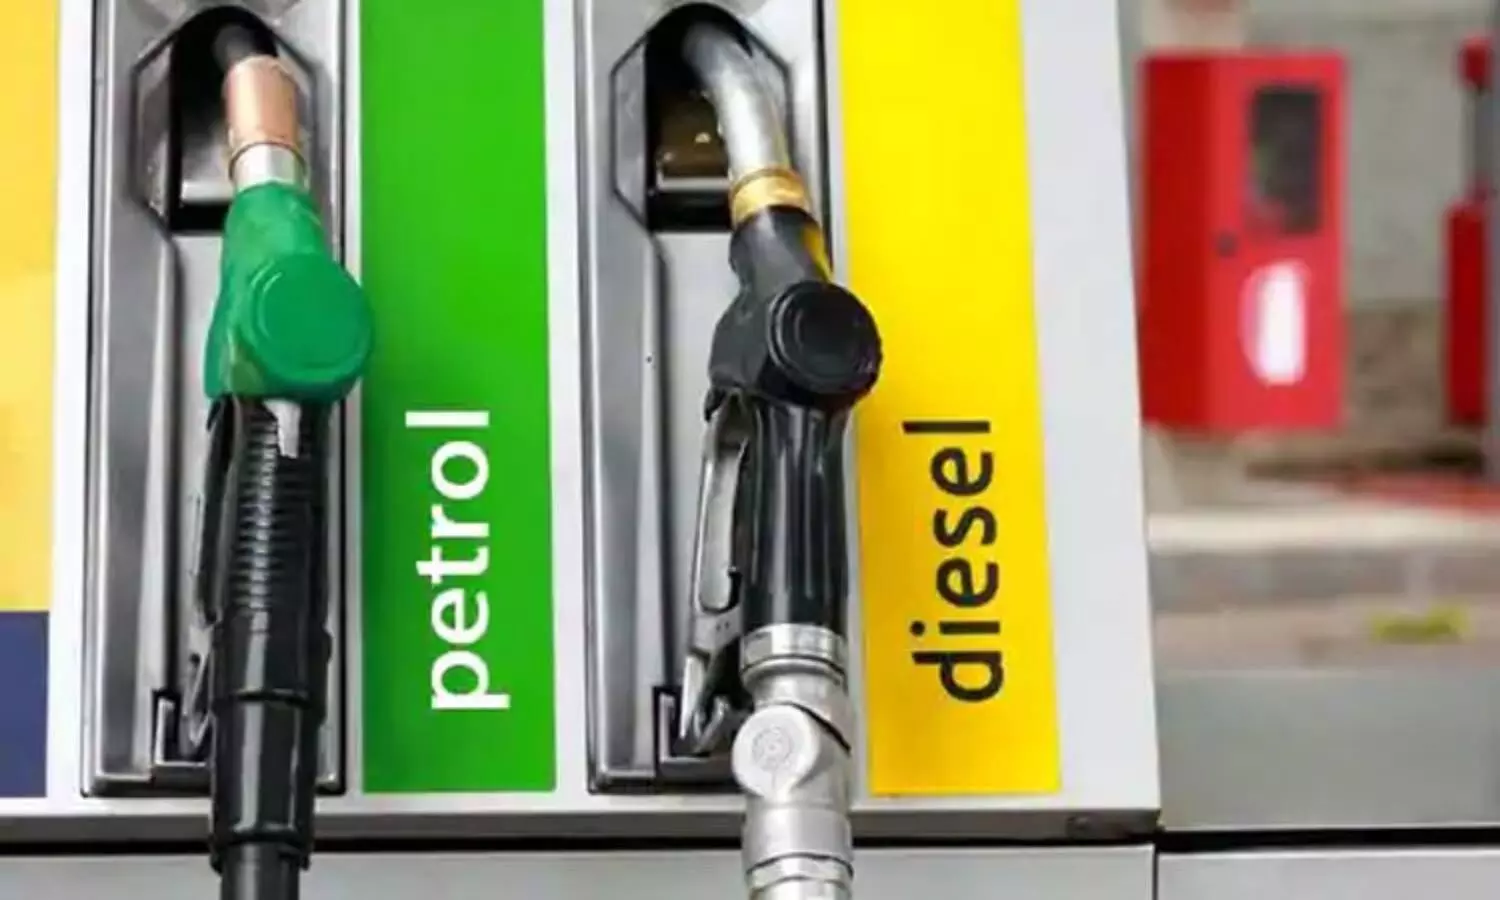 69 % of people want government to reduce excise duty on petrol, diesel: Survey